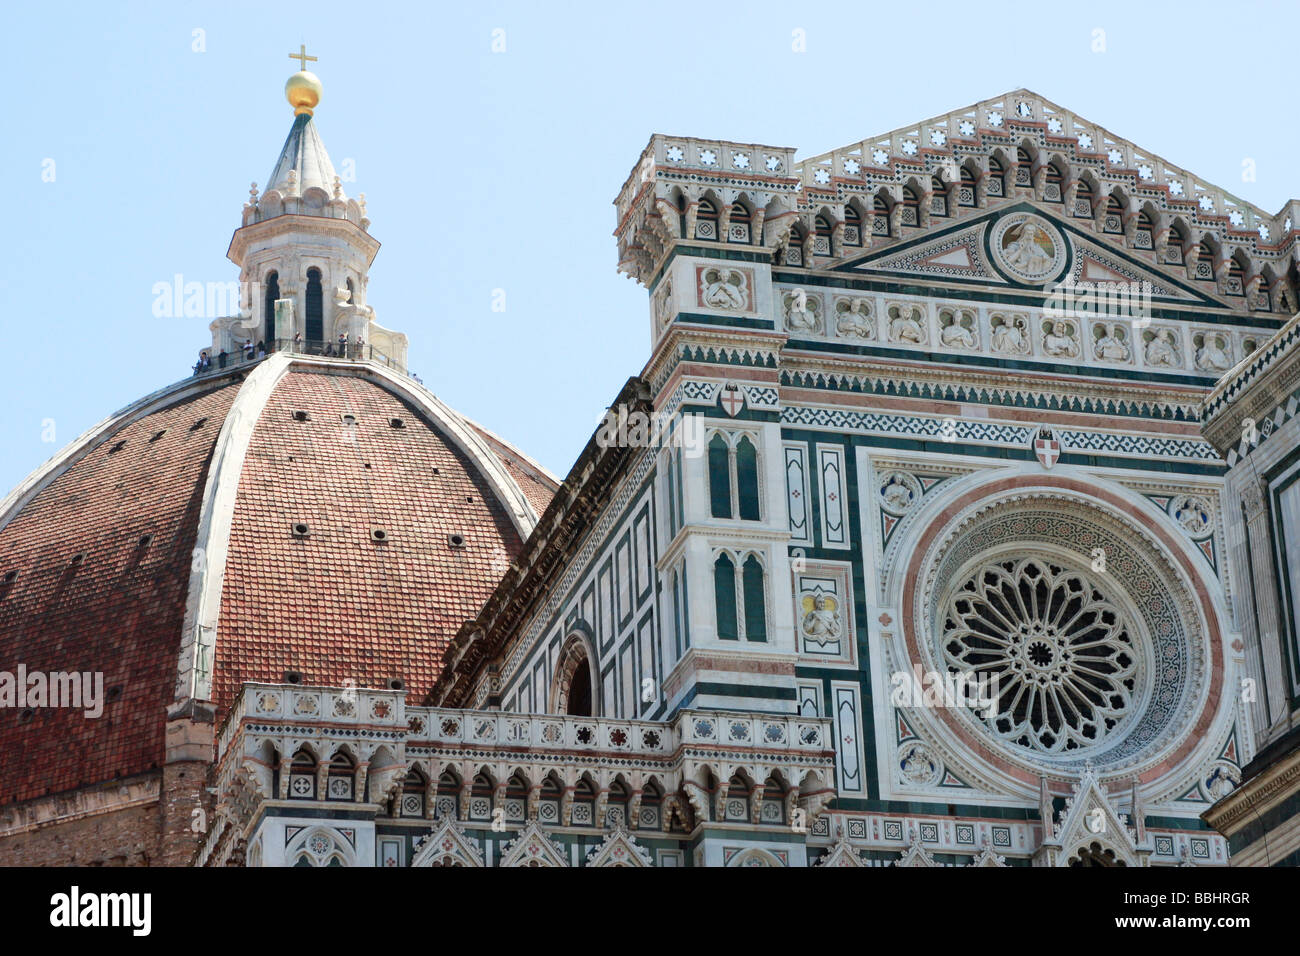 visitors climb to the top of the Dome to overlook the marble facade of Santa Maria del Fiore Cathedral (The Duomo) in Florence Stock Photo